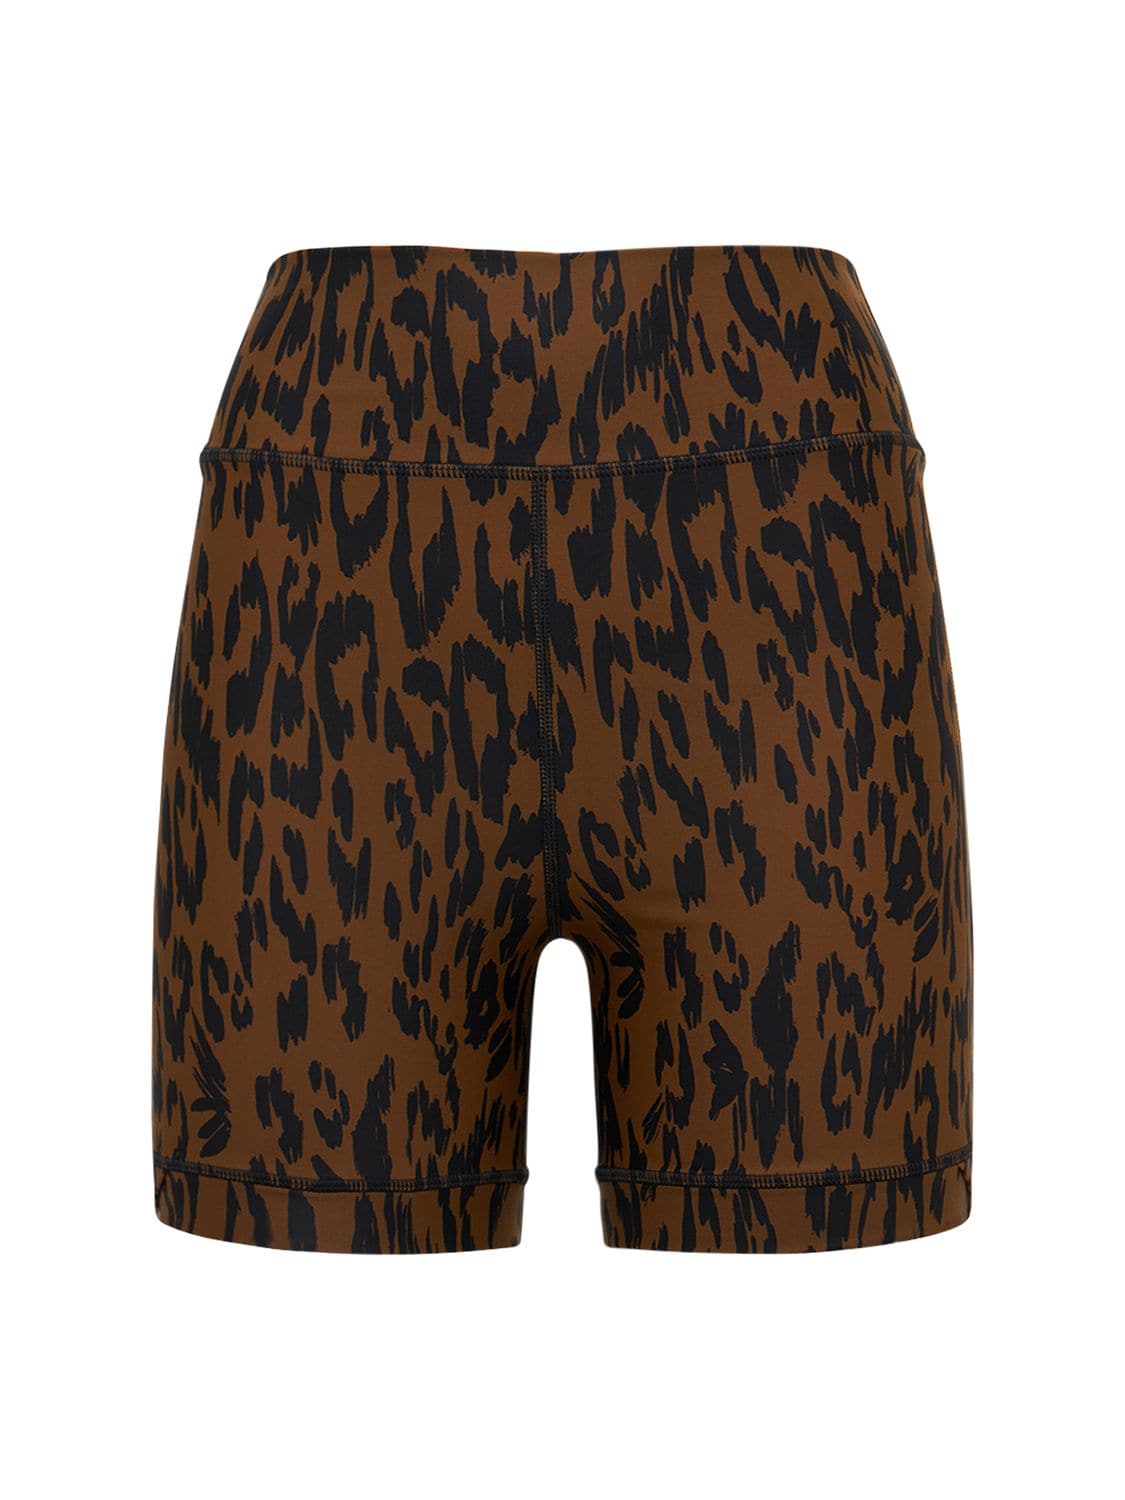 Tropical Dance Spin Shorts